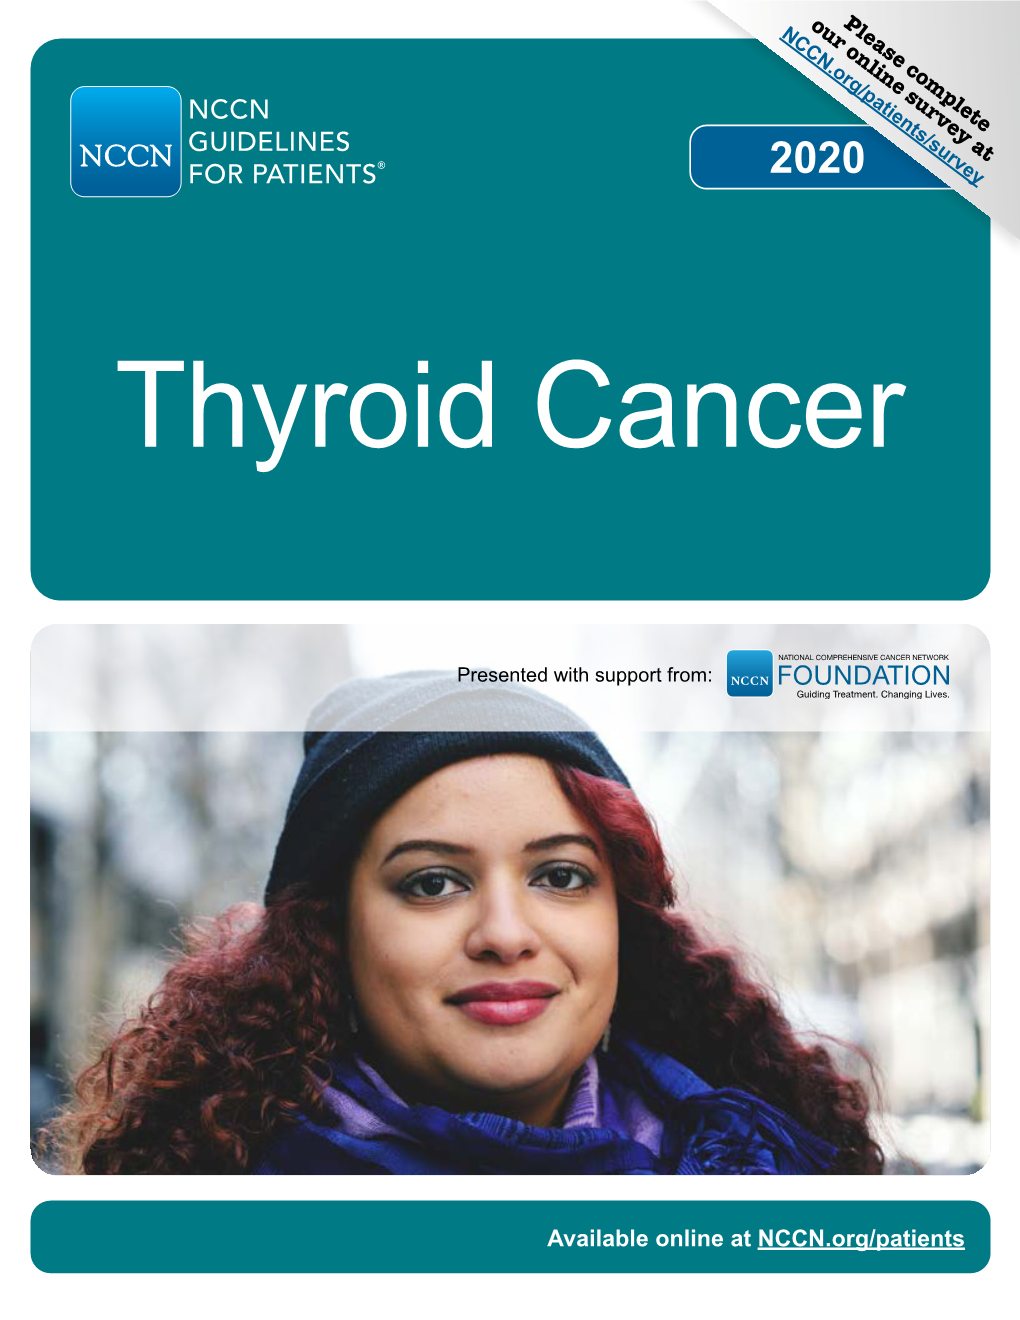 NCCN Guidelines for Patients Thyroid Cancer